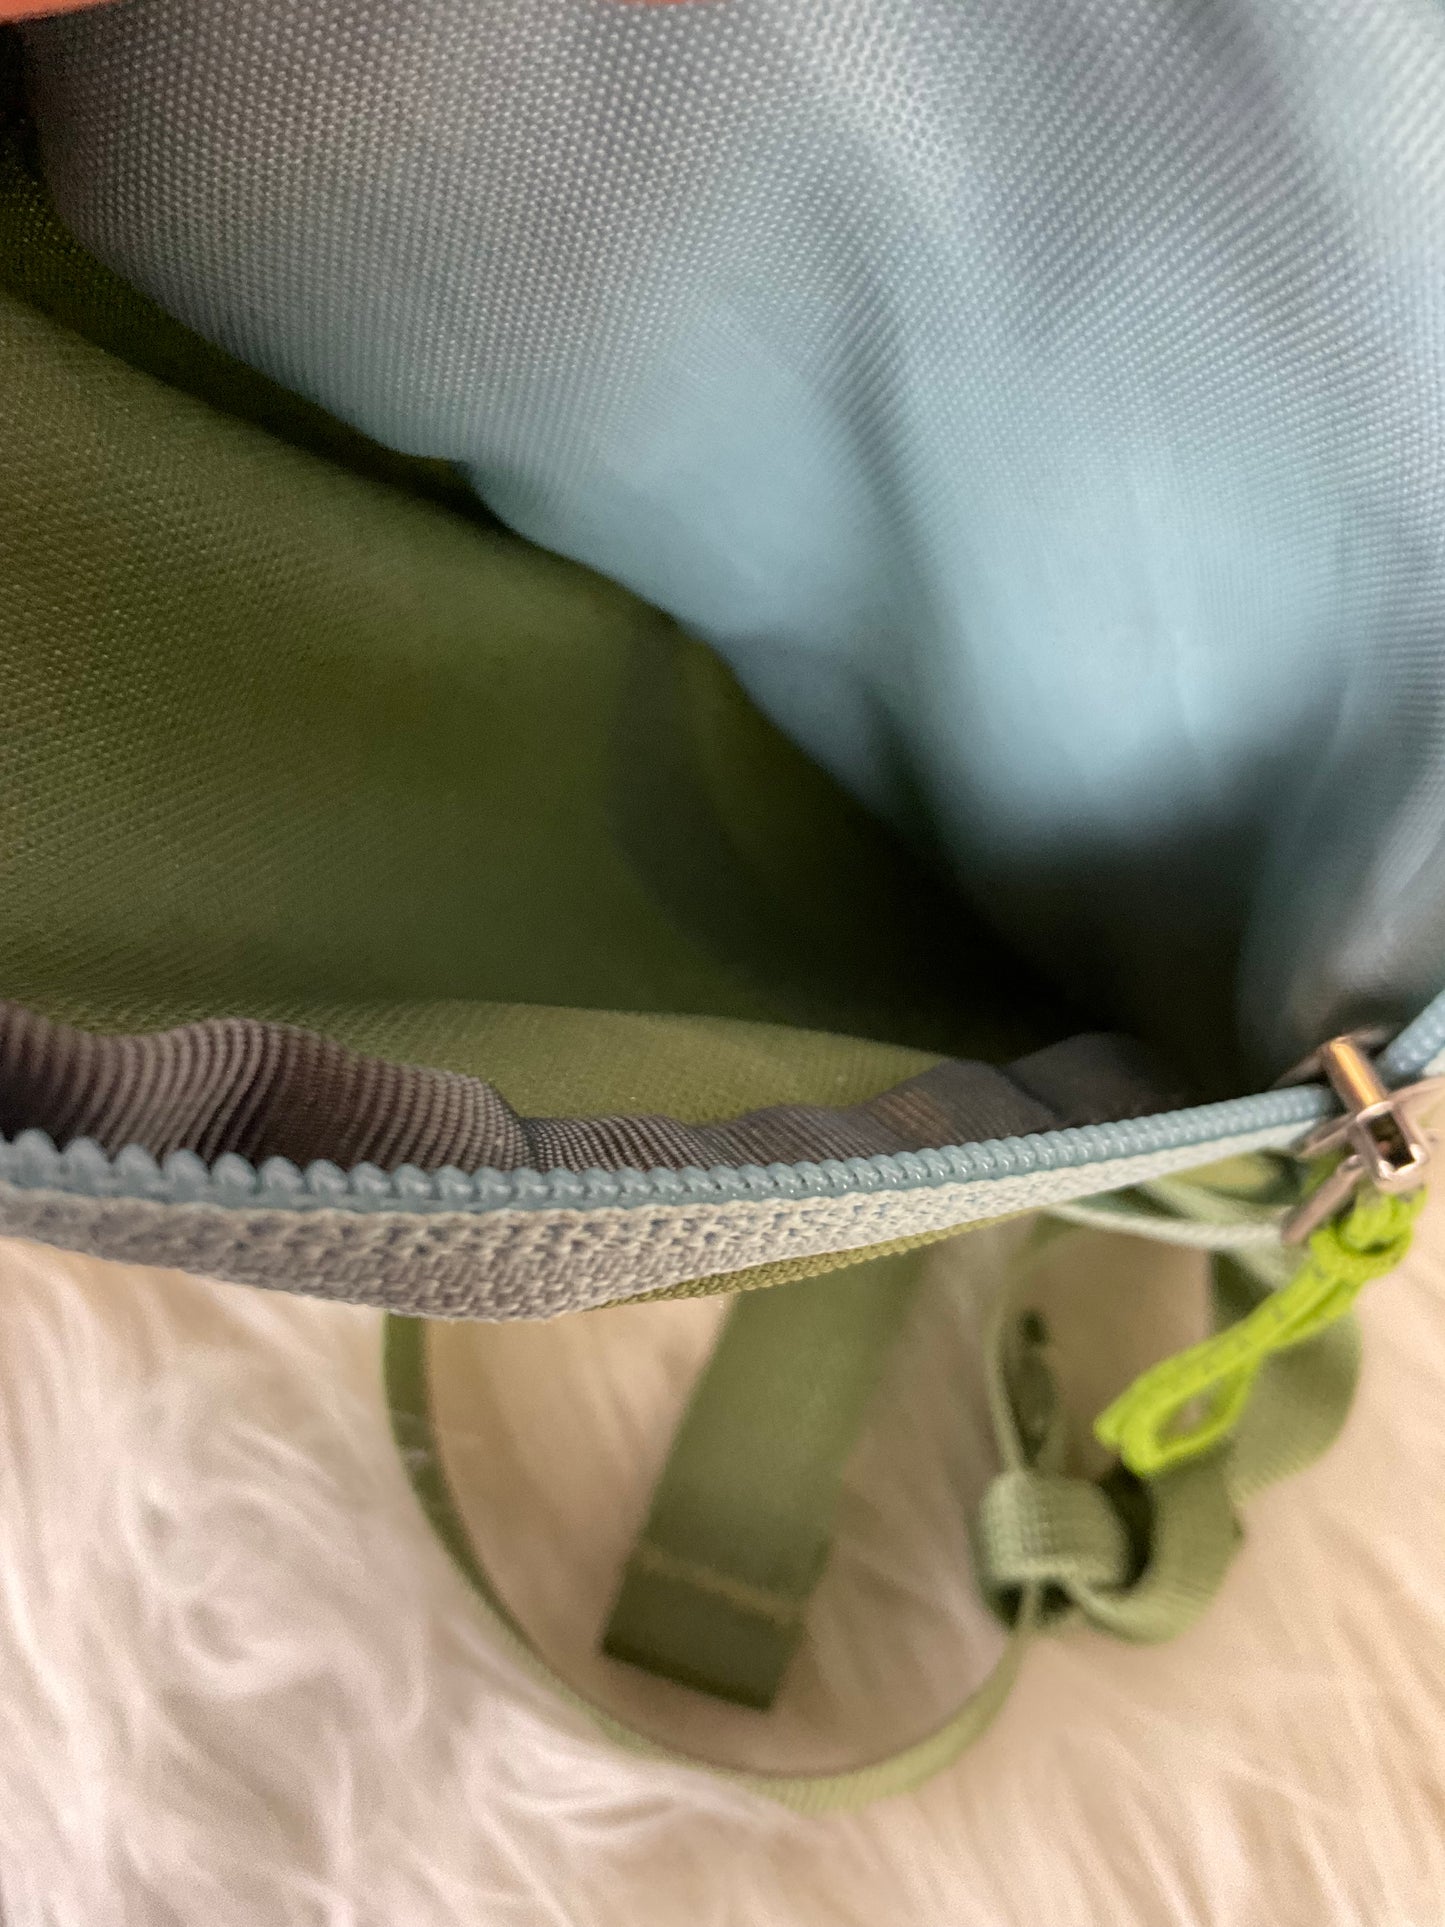 Backpack By Patagonia  Size: Small